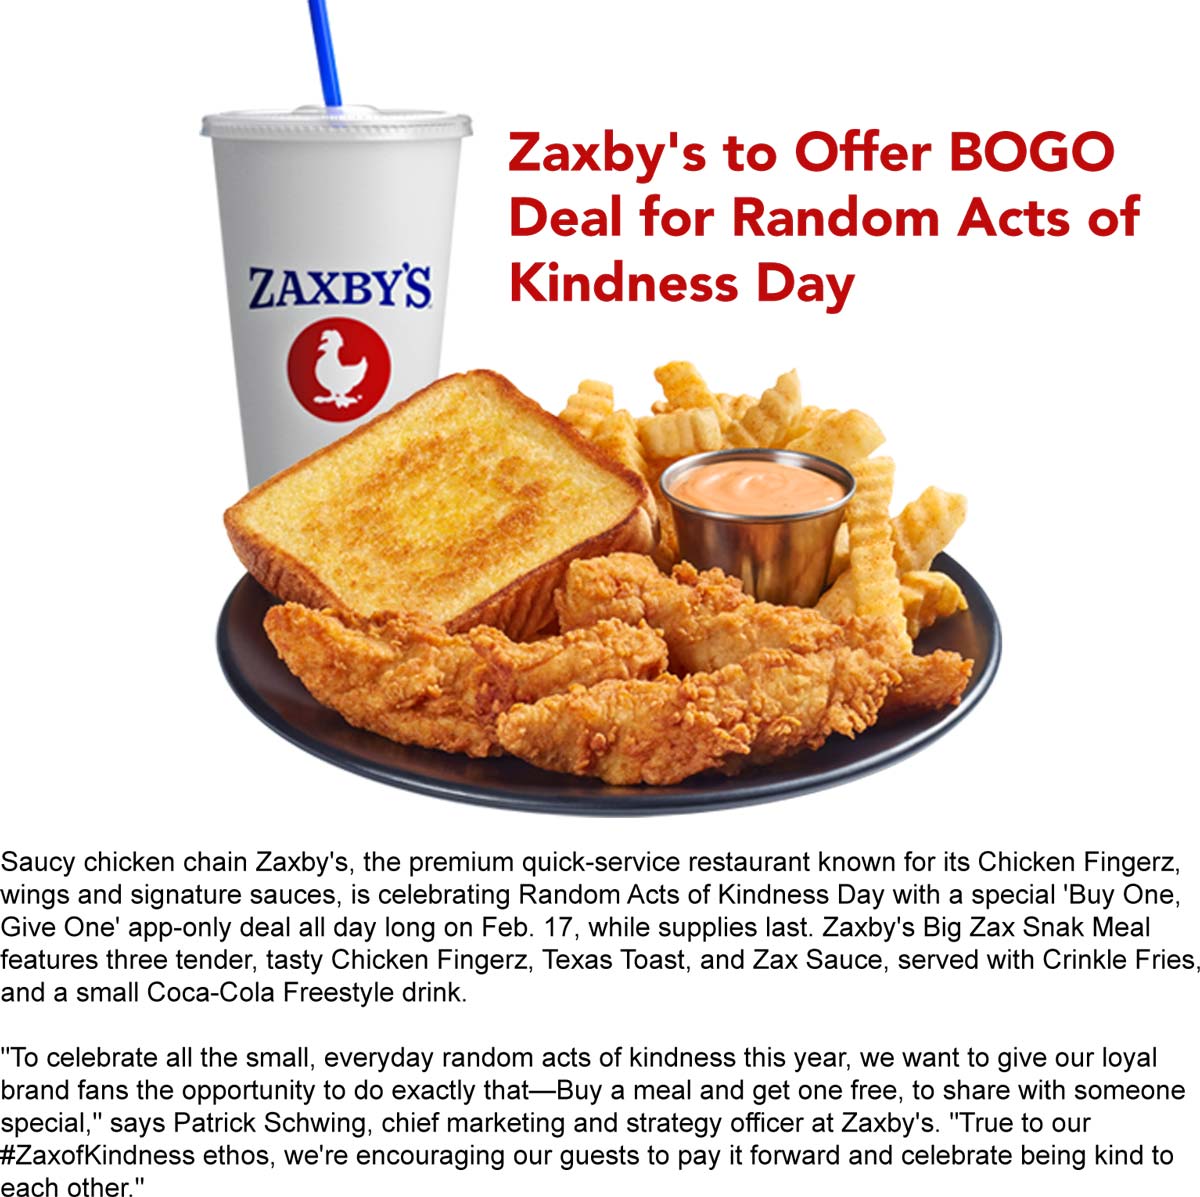 Second meal free Friday at Zaxbys zaxbys The Coupons App®